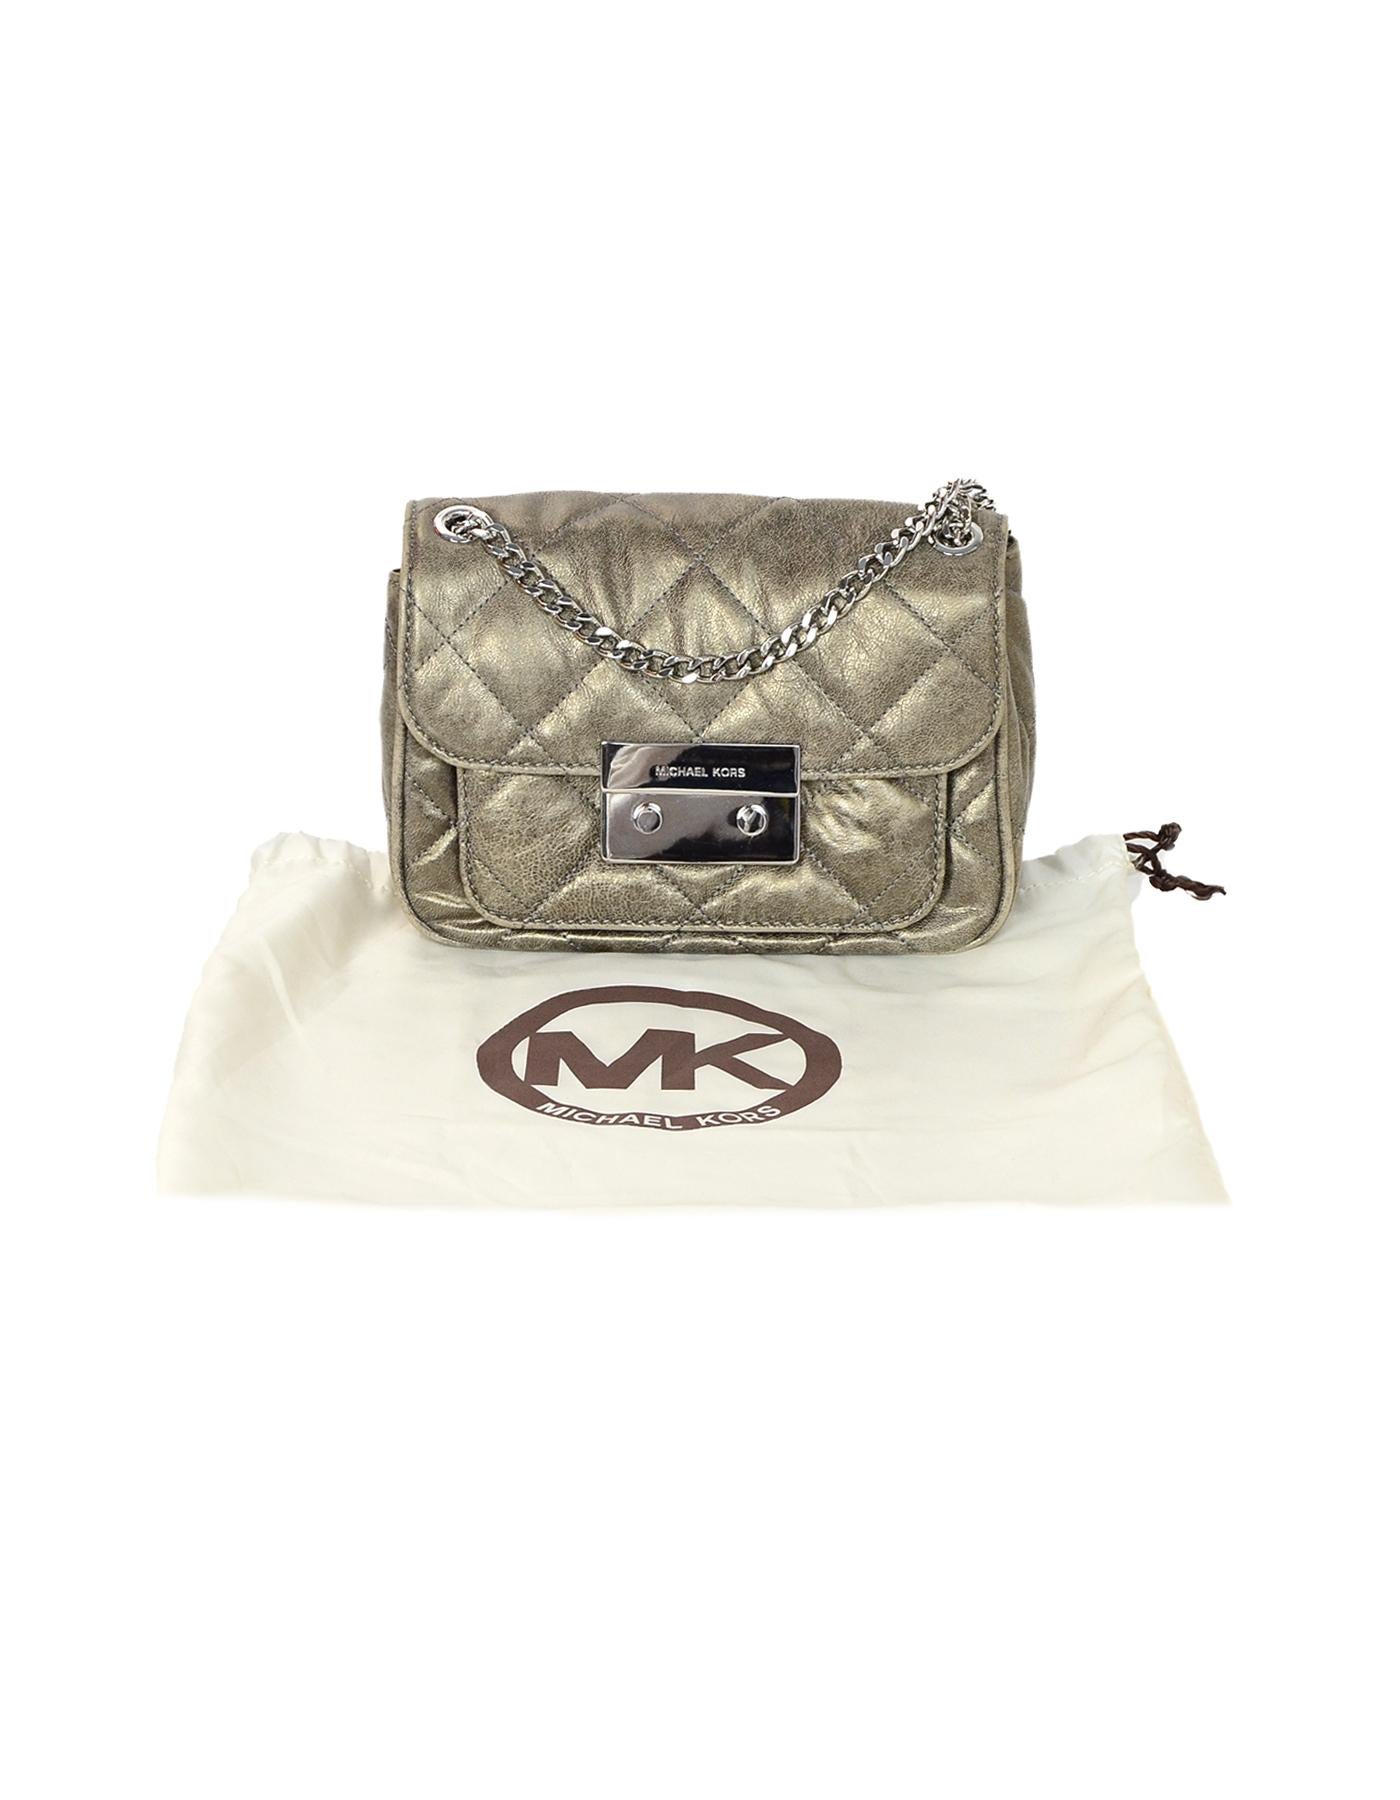 Michael Kors Sueded Leather Distressed Metallic Quilted Sloan Flap Crossbody Bag 2